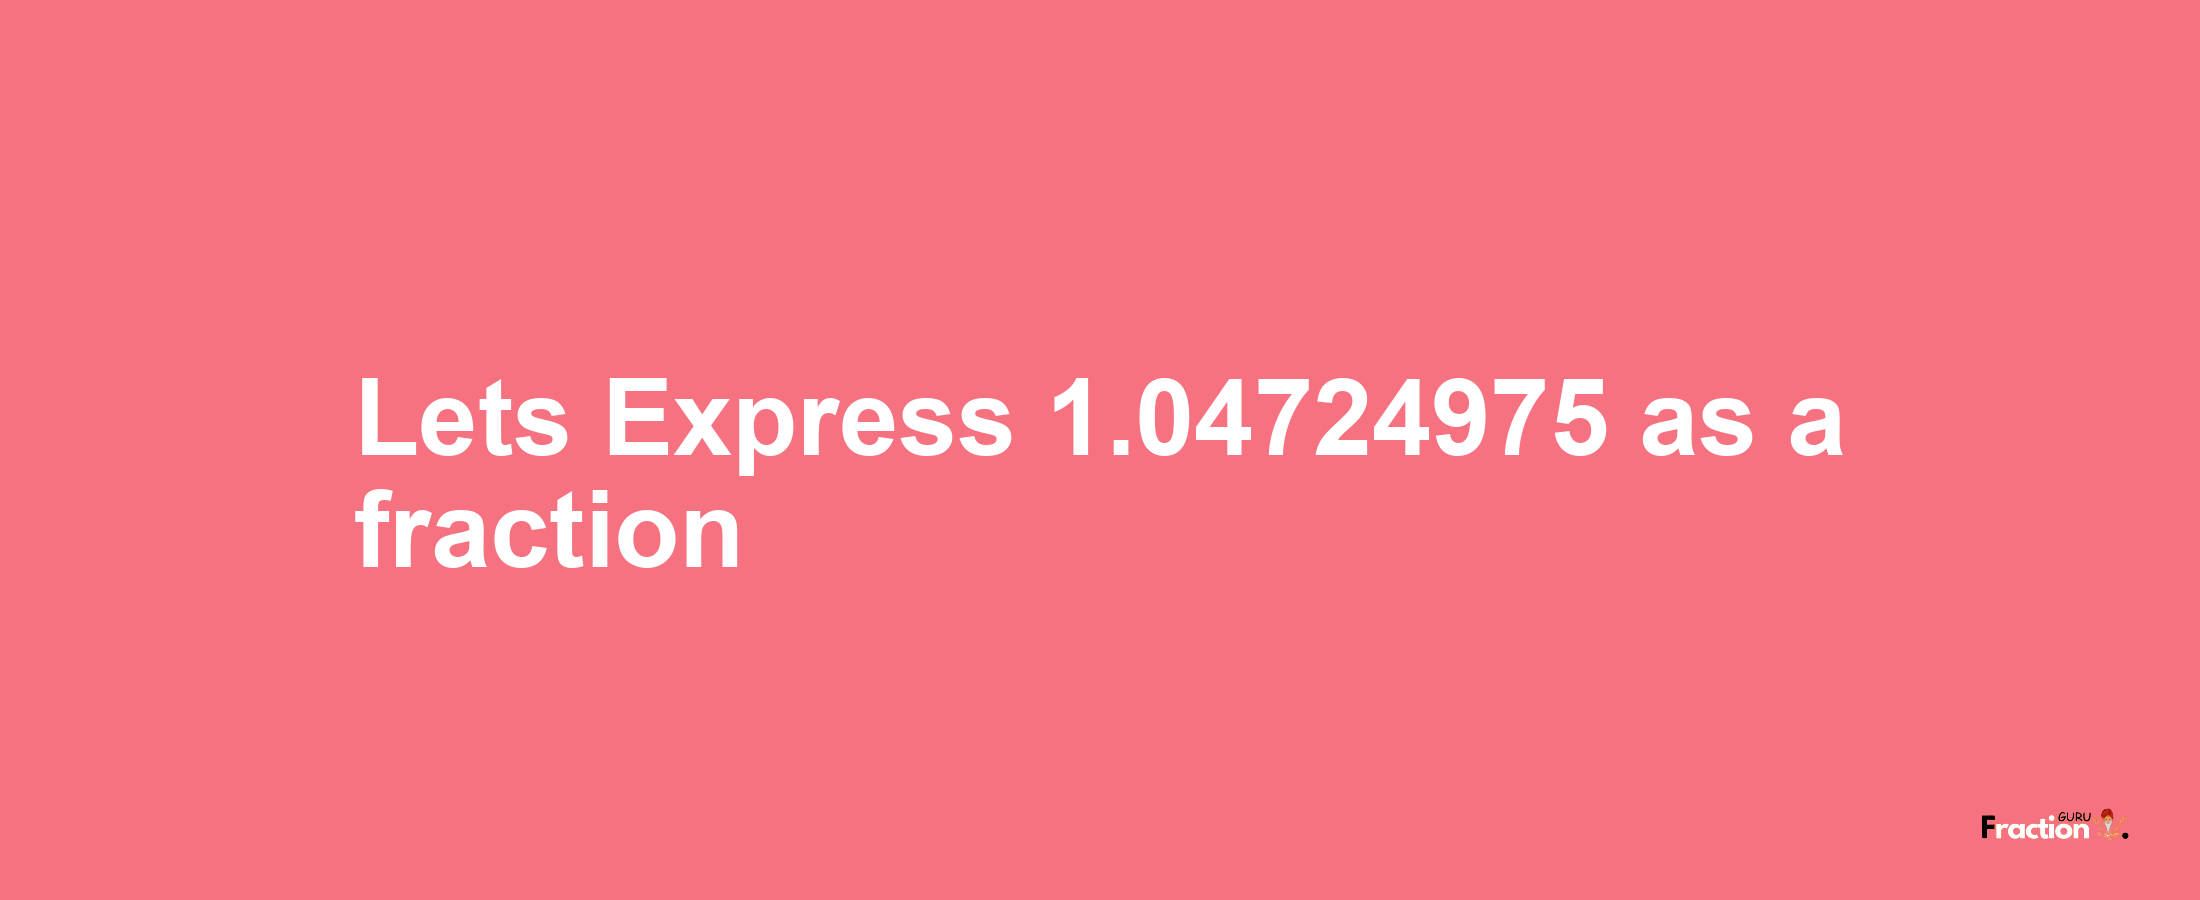 Lets Express 1.04724975 as afraction